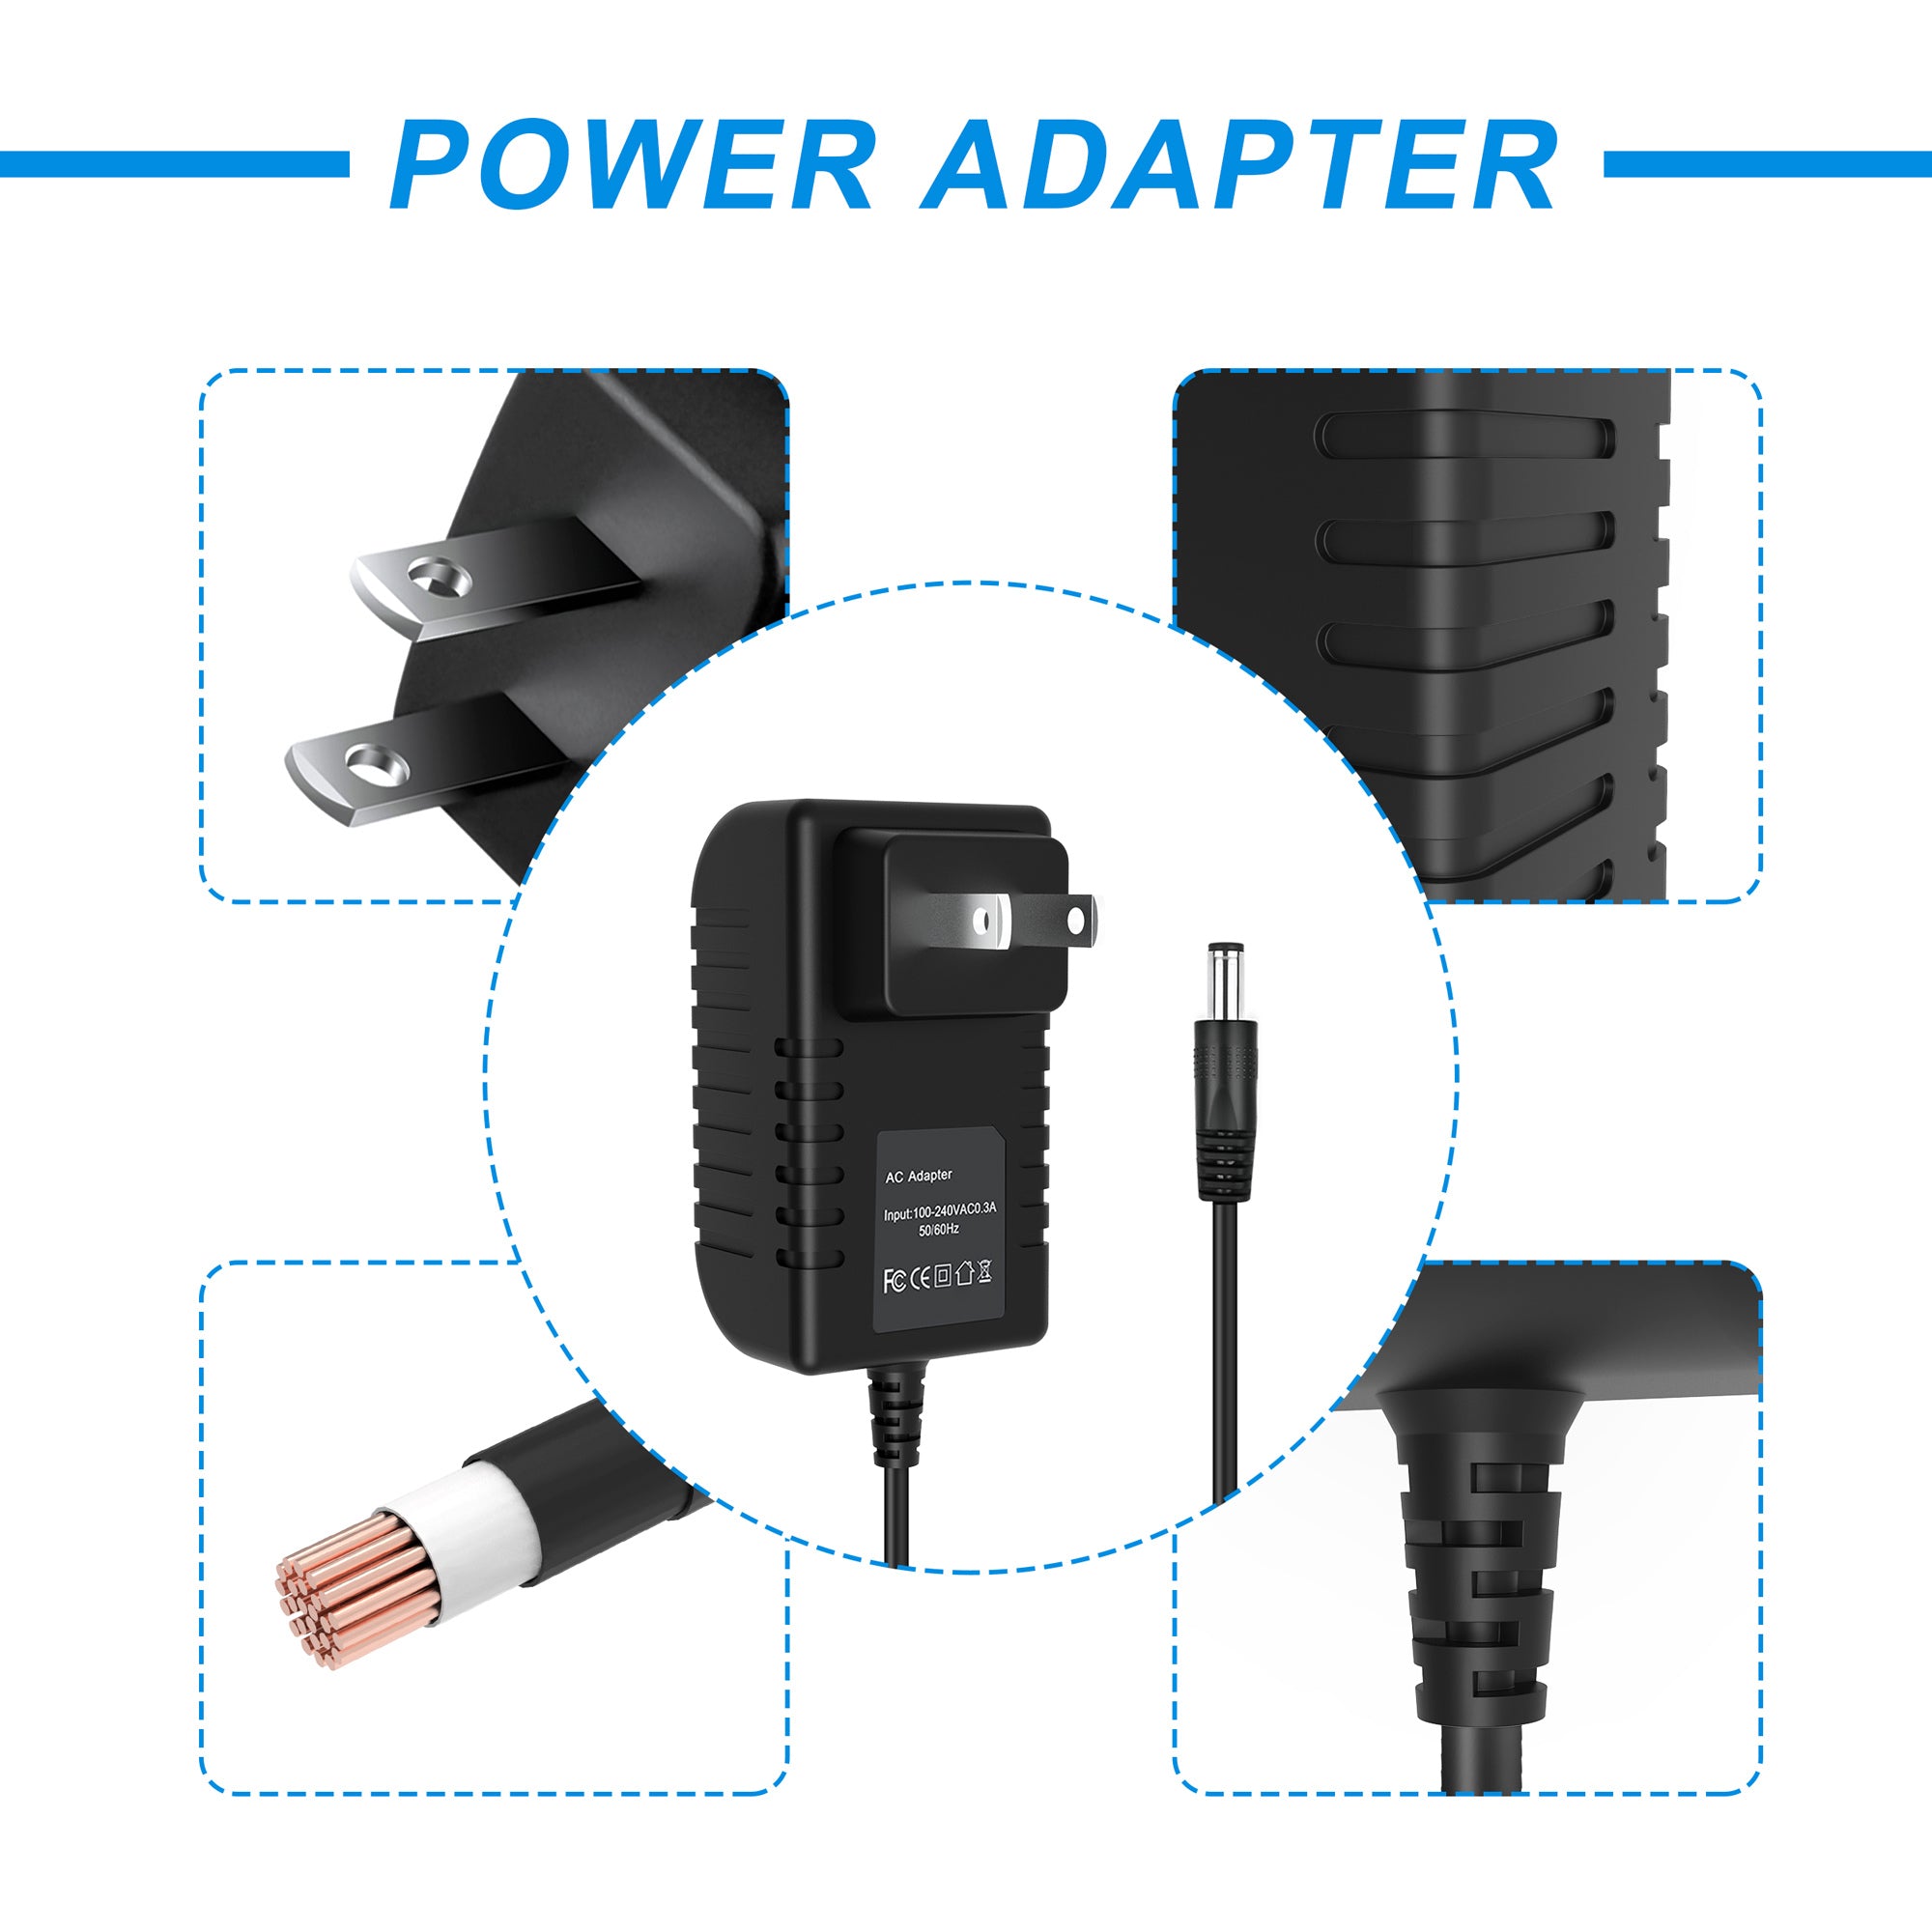 AbleGrid AC/DC Adapter Compatible with Roku 2 HD 2720 R W 2720 RW 2720X b TV Video Streaming Player Power Supply Cord Cable Wall Home Charger Input: 100 - 240 VAC 50/60Hz Worldwide Voltage Use PSU